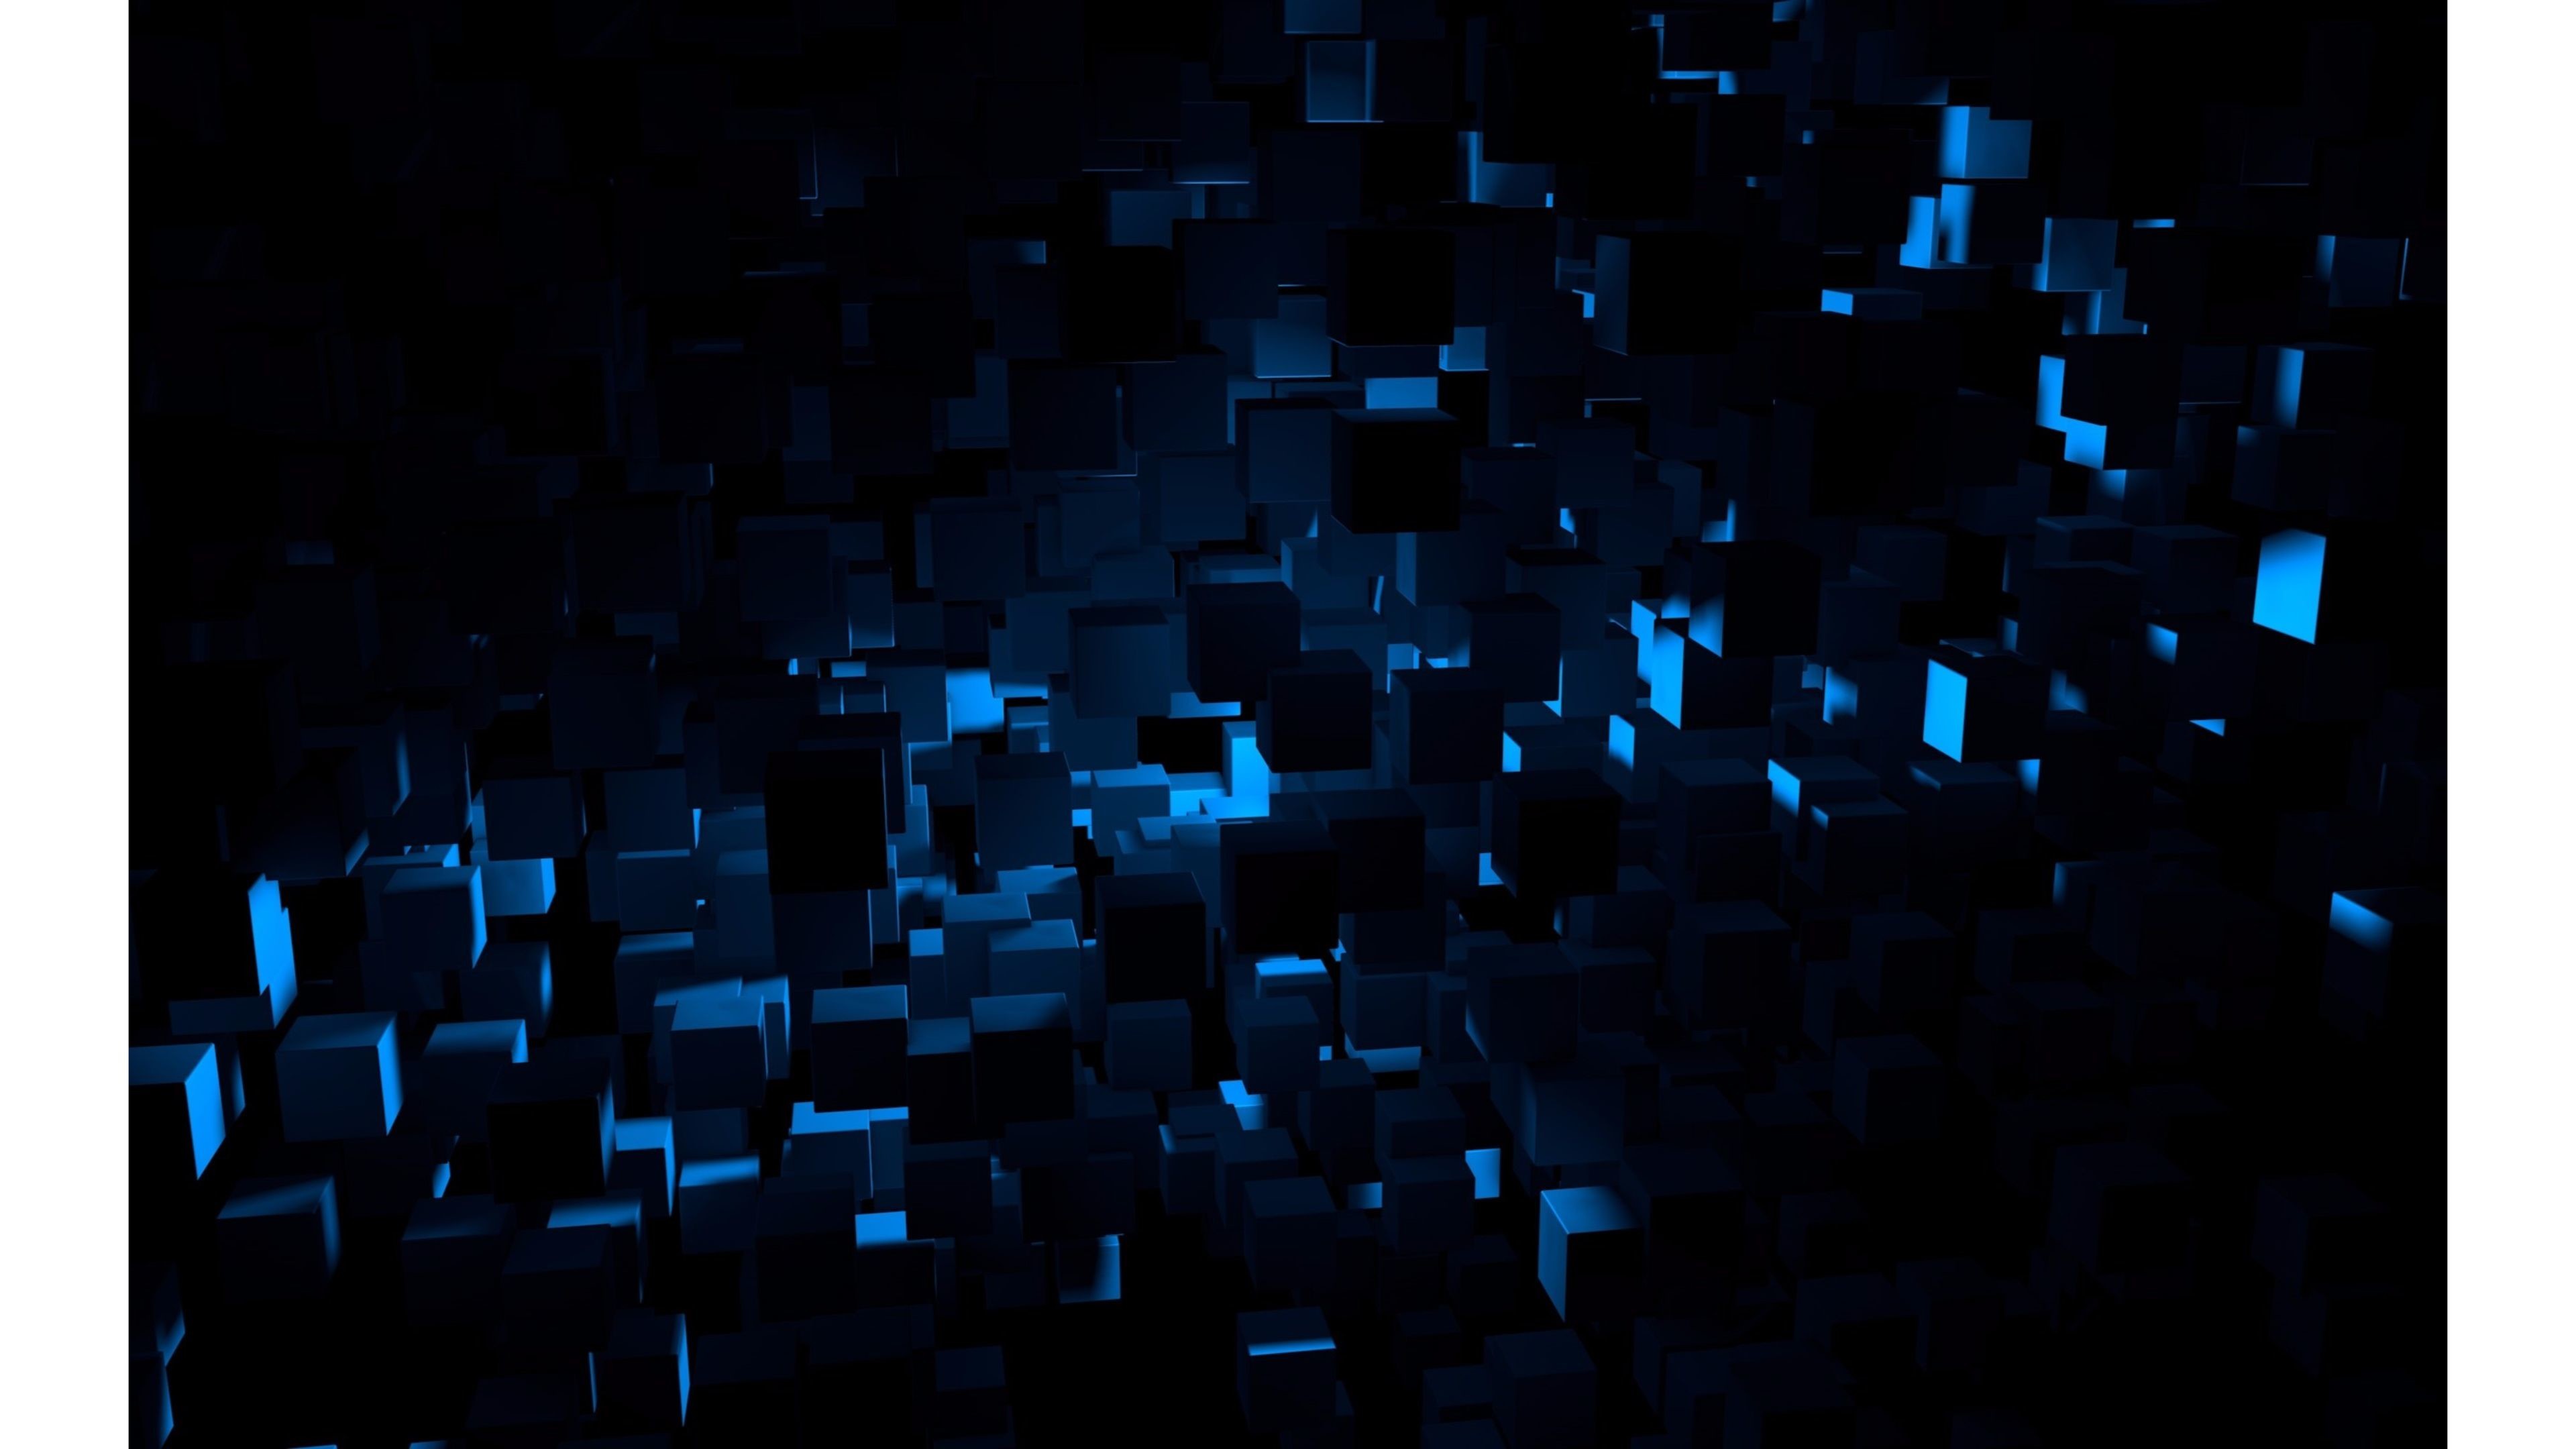 3840x2160  Wallpapers 4k Abstract Wallpaper Blue And Black 4K | Free  Widescreen Hd abstract .